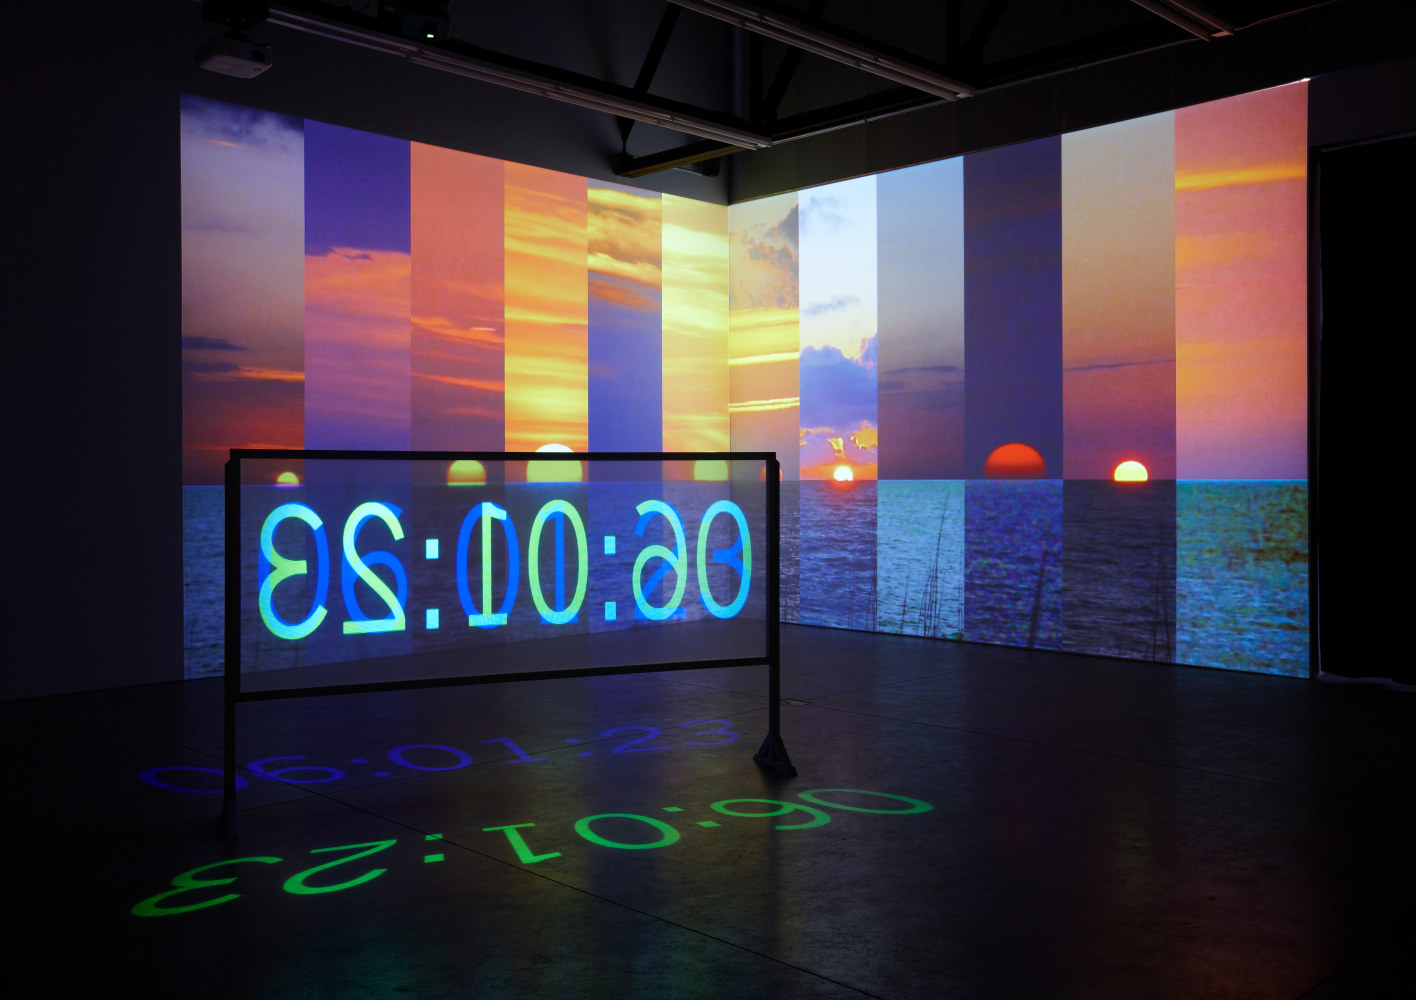 Charles Atlas
The Waning of Justice, 2015
Multi-channel video installation with sound
Duration: 23 minutes, 44 seconds
Edition of 5 plus 2 artist&amp;rsquo;s proof

Installation view, Luhring Augustine,&amp;nbsp;February 7 &amp;ndash; March 14, 2015